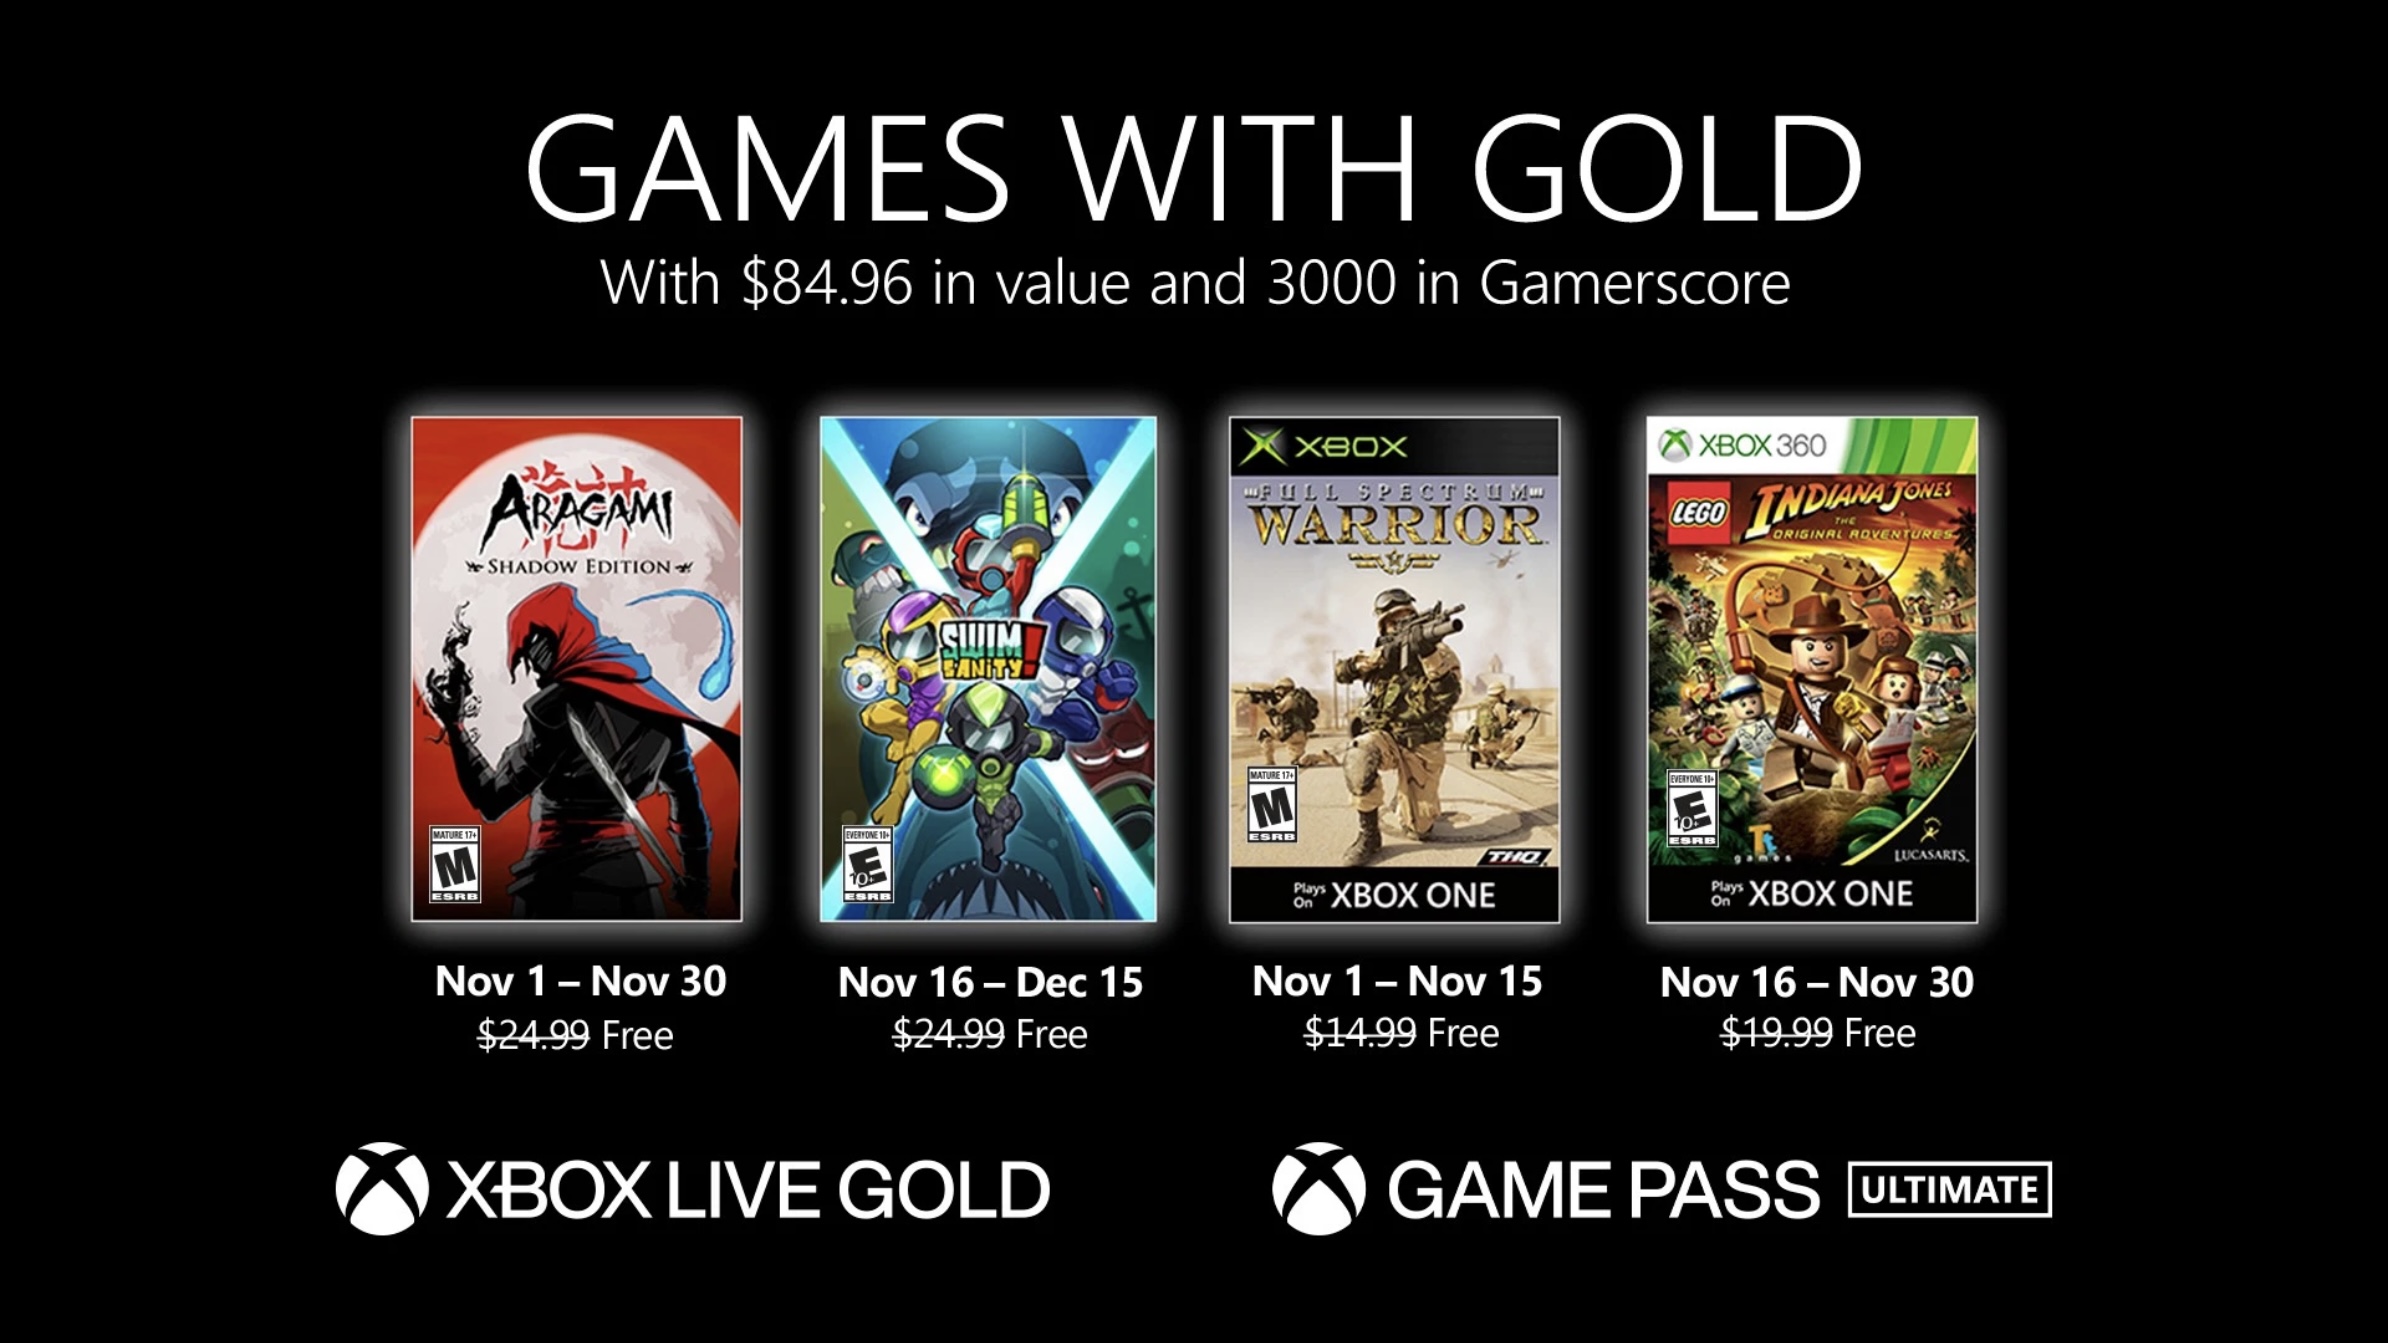 Xbox Games With Gold will no longer include Xbox 360 games